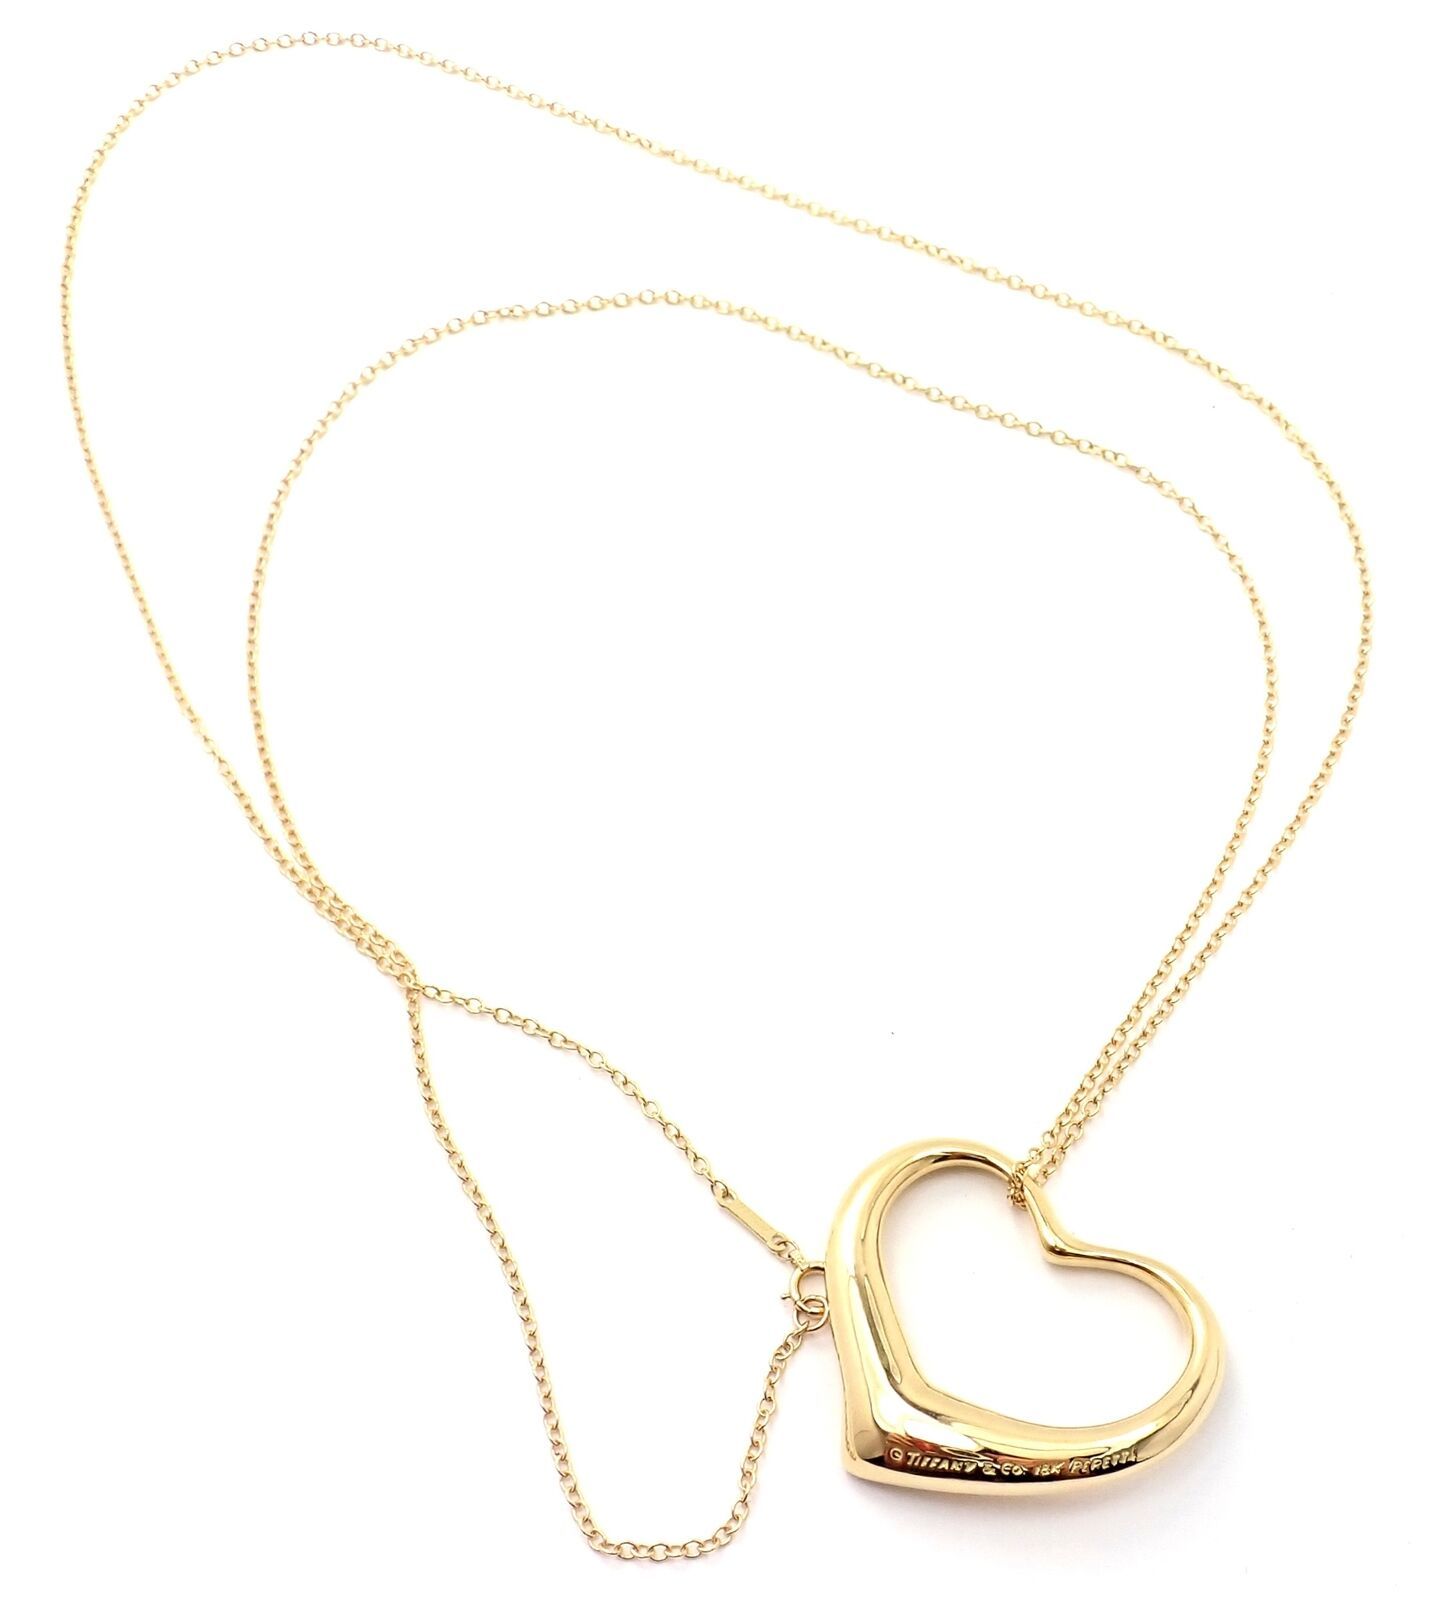 Tiffany & Co 18k Yellow Gold Peretti Extra Large Open Heart Pendant 30" Necklace - $3,150.00